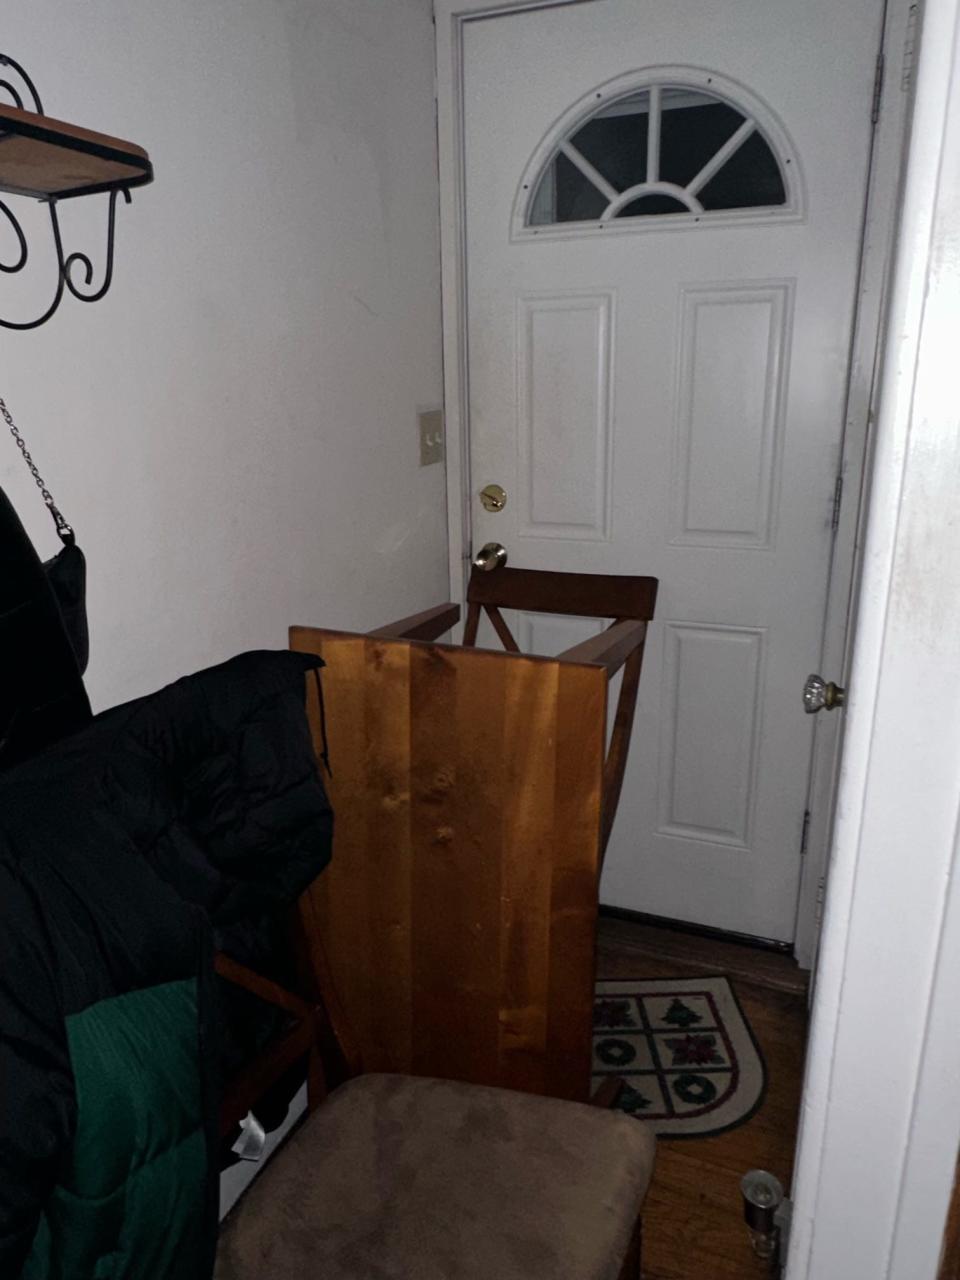 Michigan State University students barricade their home's doors during an East Lansing shooting Feb. 13, 2023.